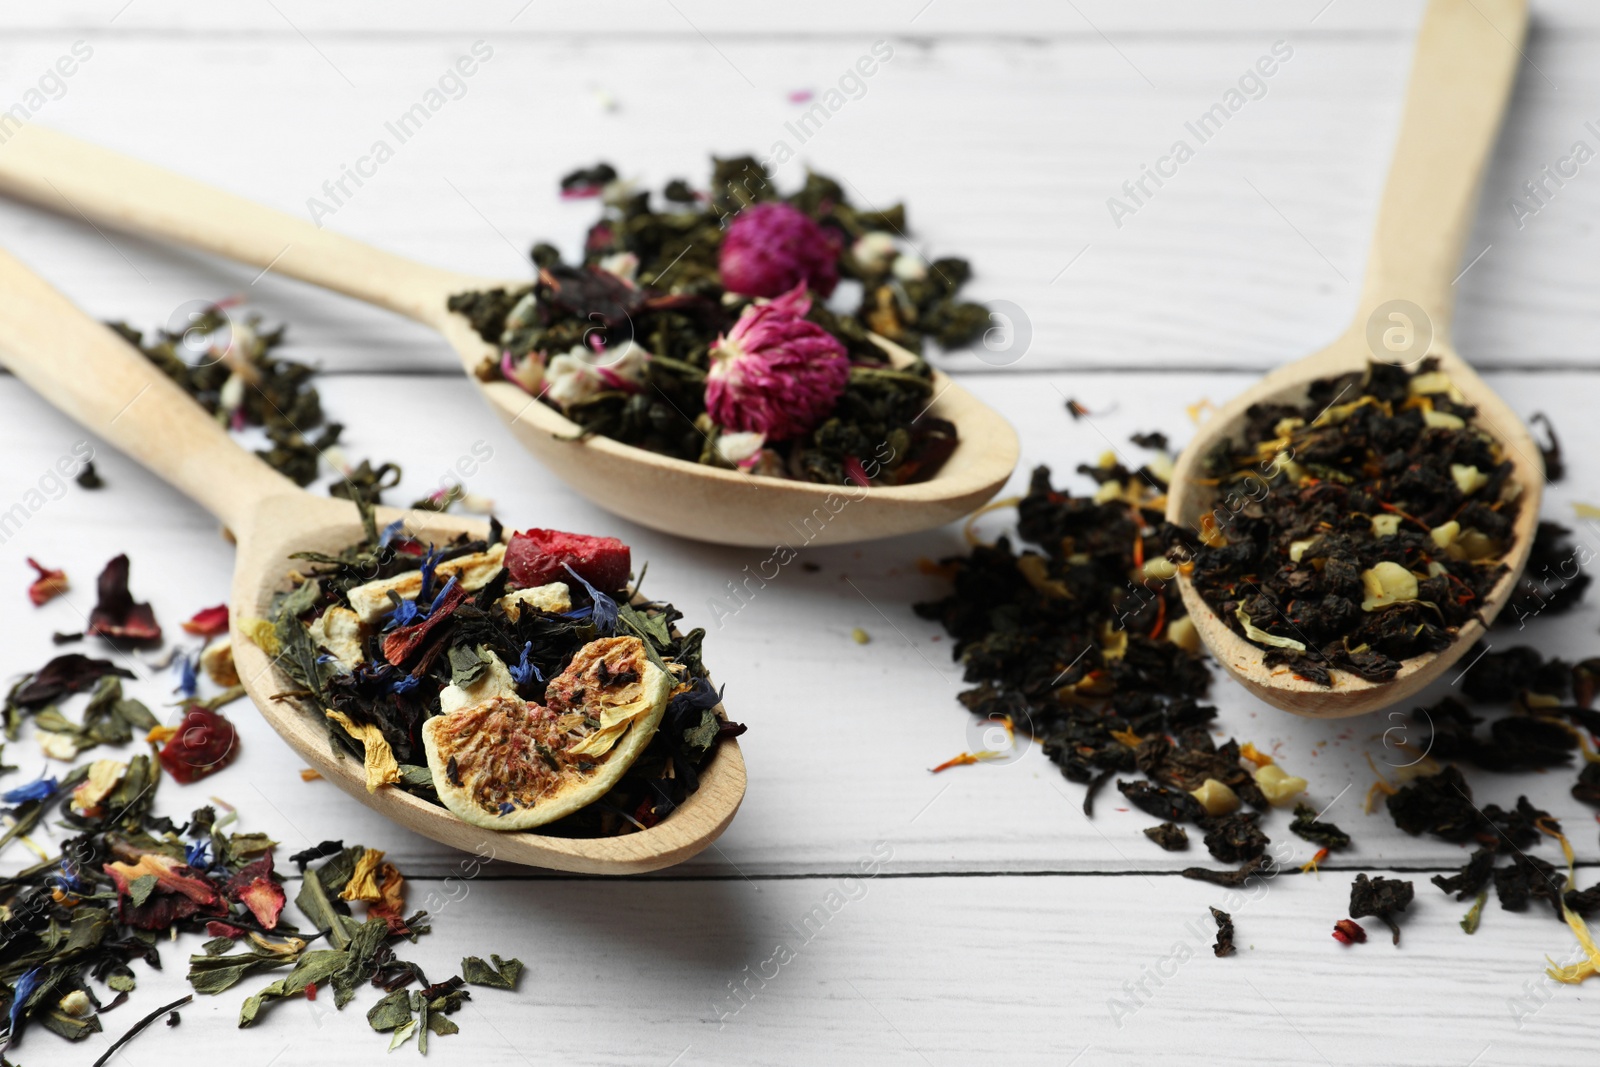 Photo of Spoons with dried herbal tea leaves and fruits on white wooden table, closeup